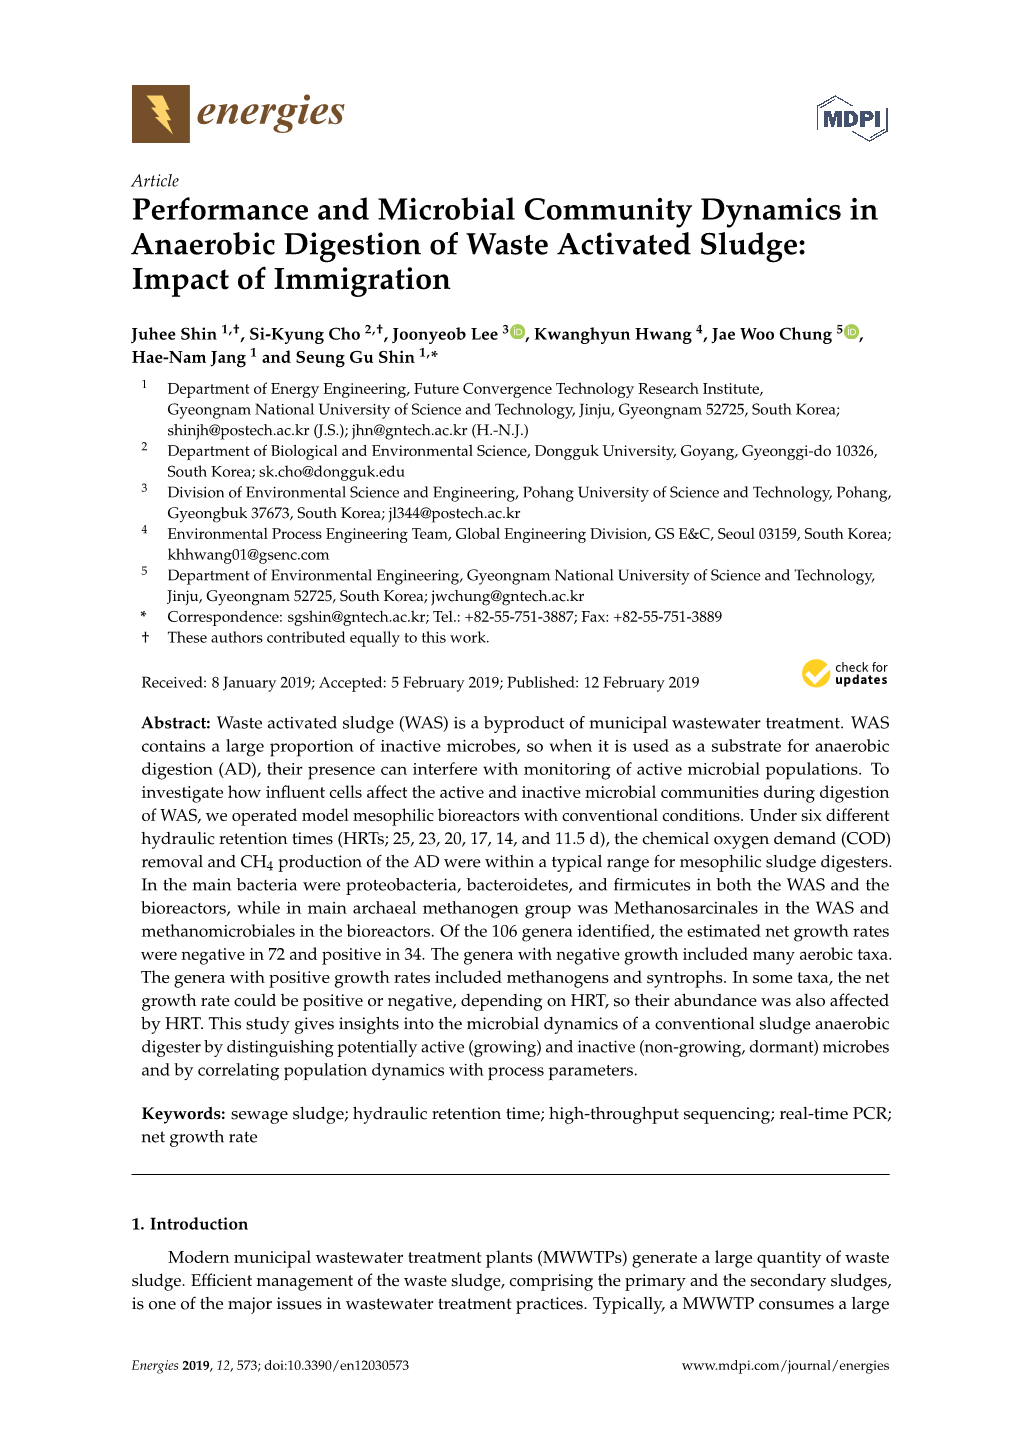 Performance and Microbial Community Dynamics in Anaerobic Digestion of Waste Activated Sludge: Impact of Immigration